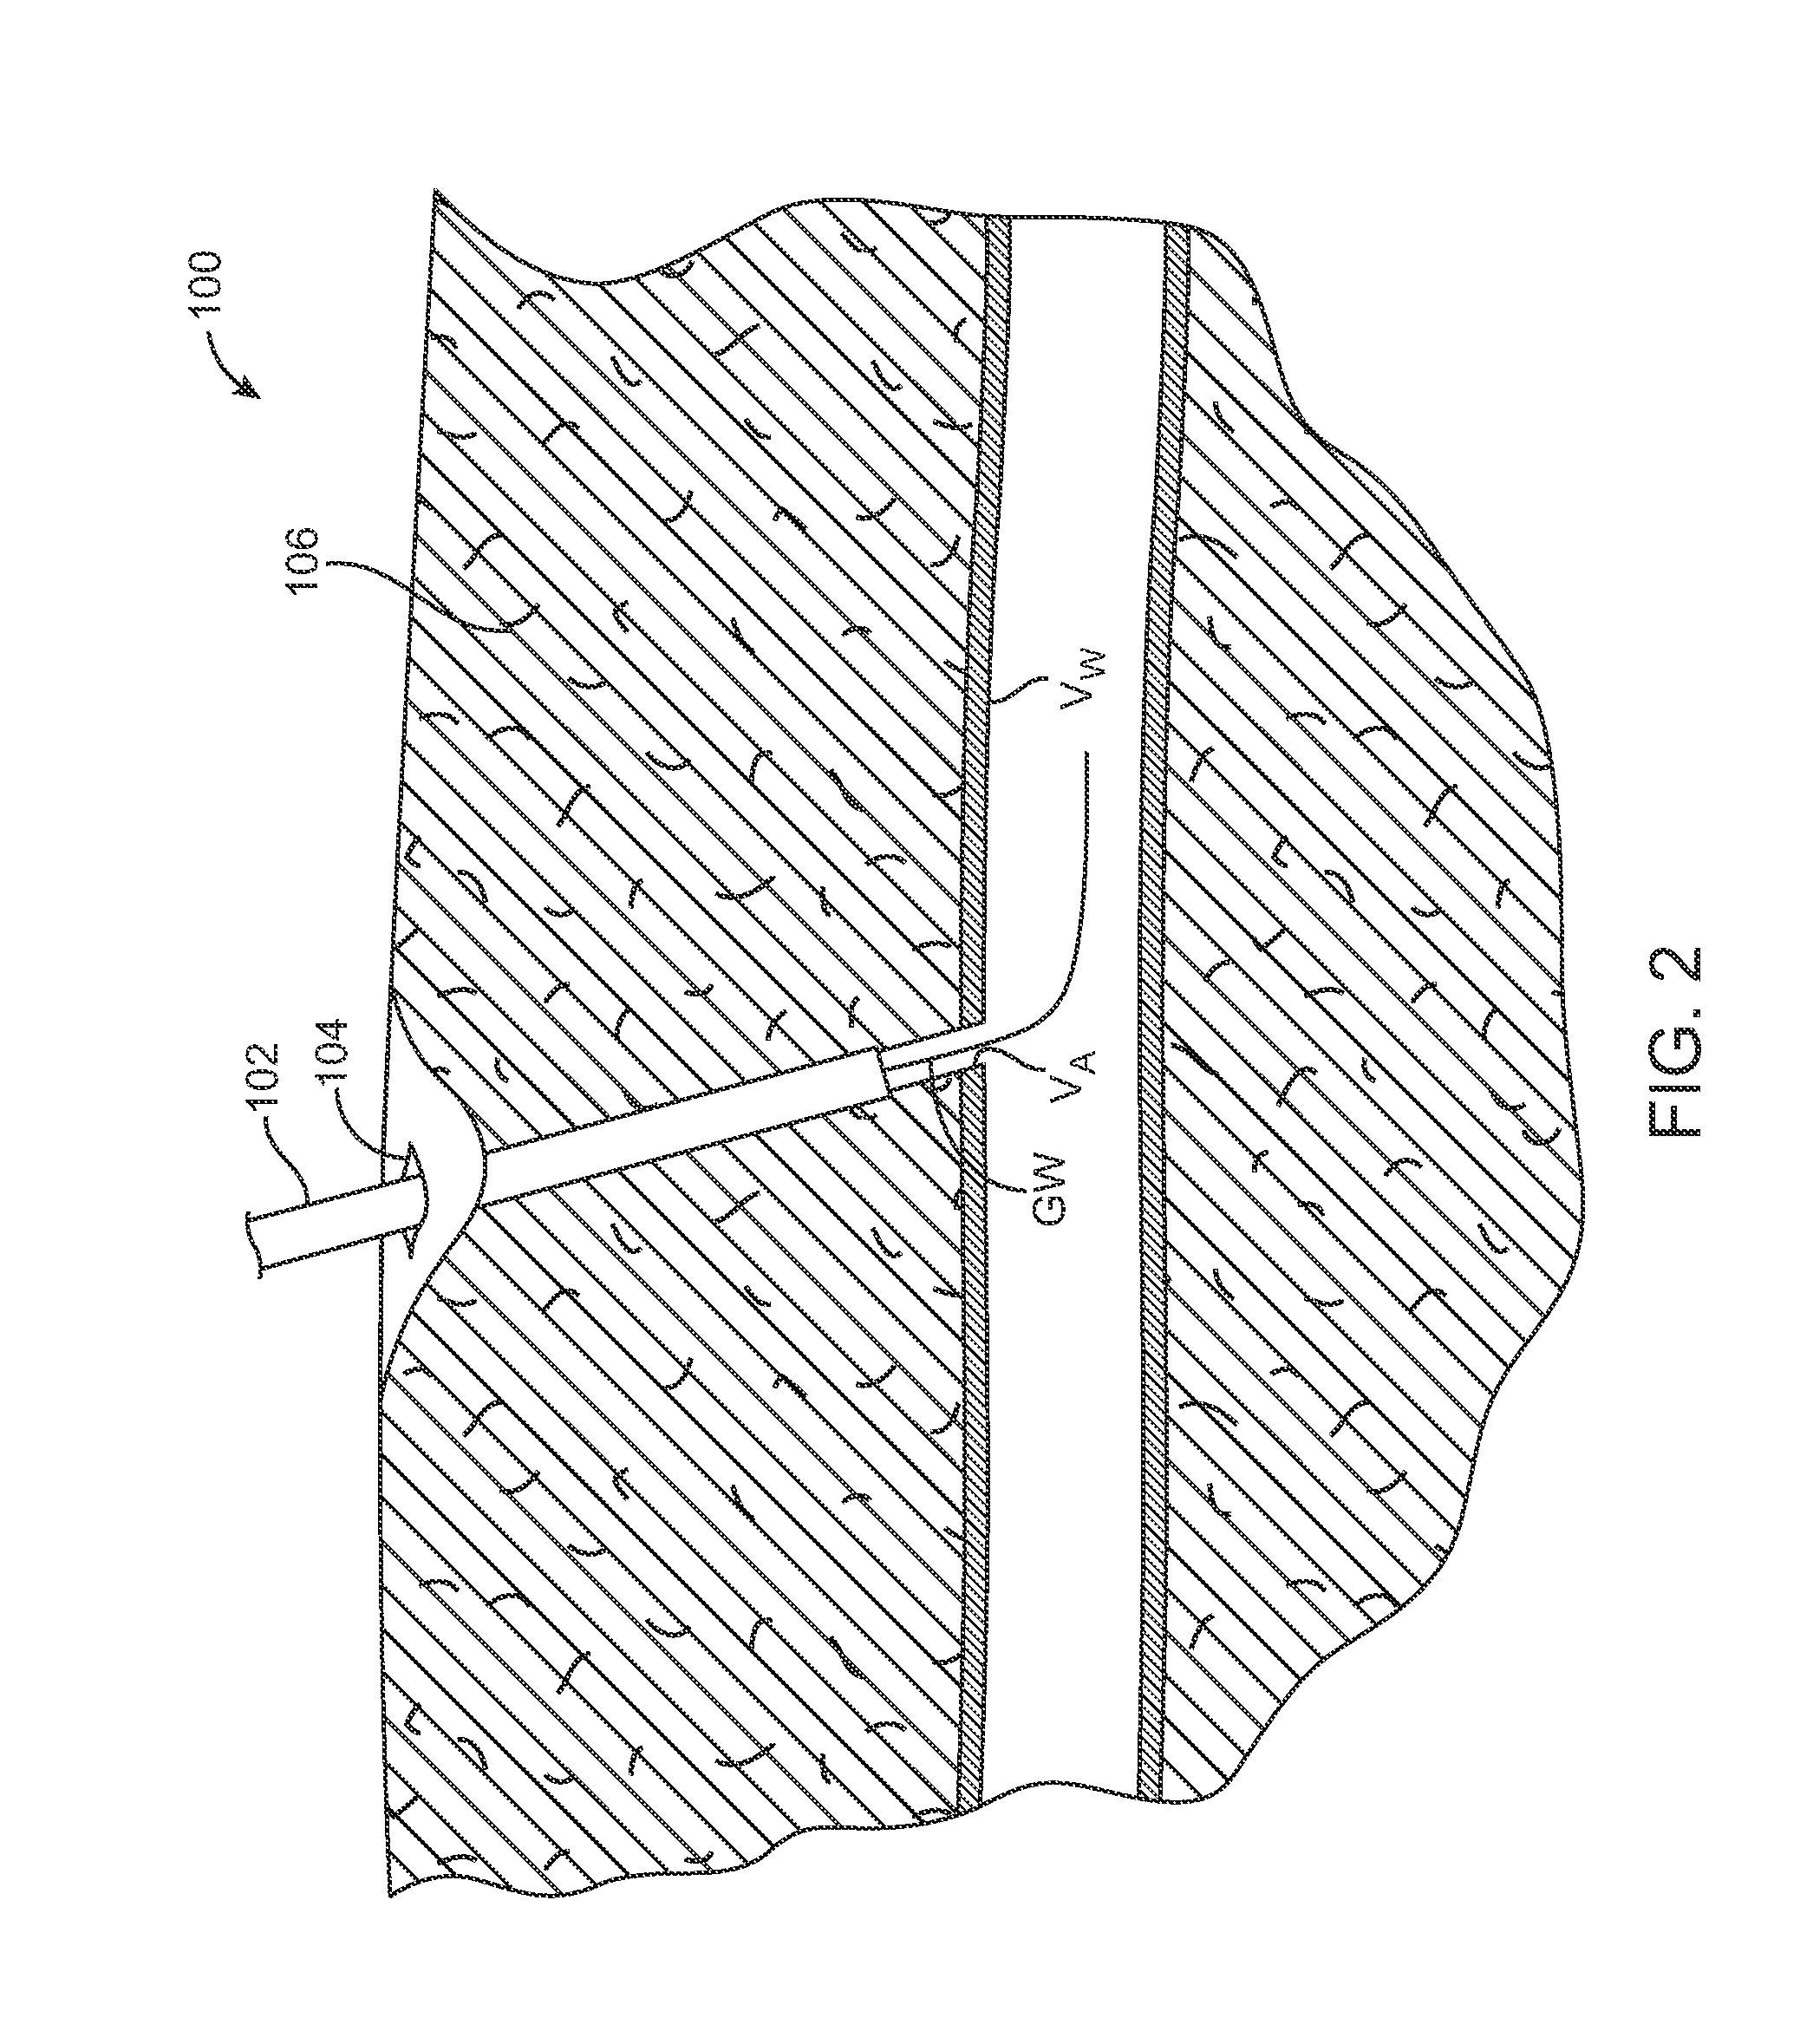 Suturing Device and Method for Sealing an Opening in a Blood Vessel or Other Biological Structure